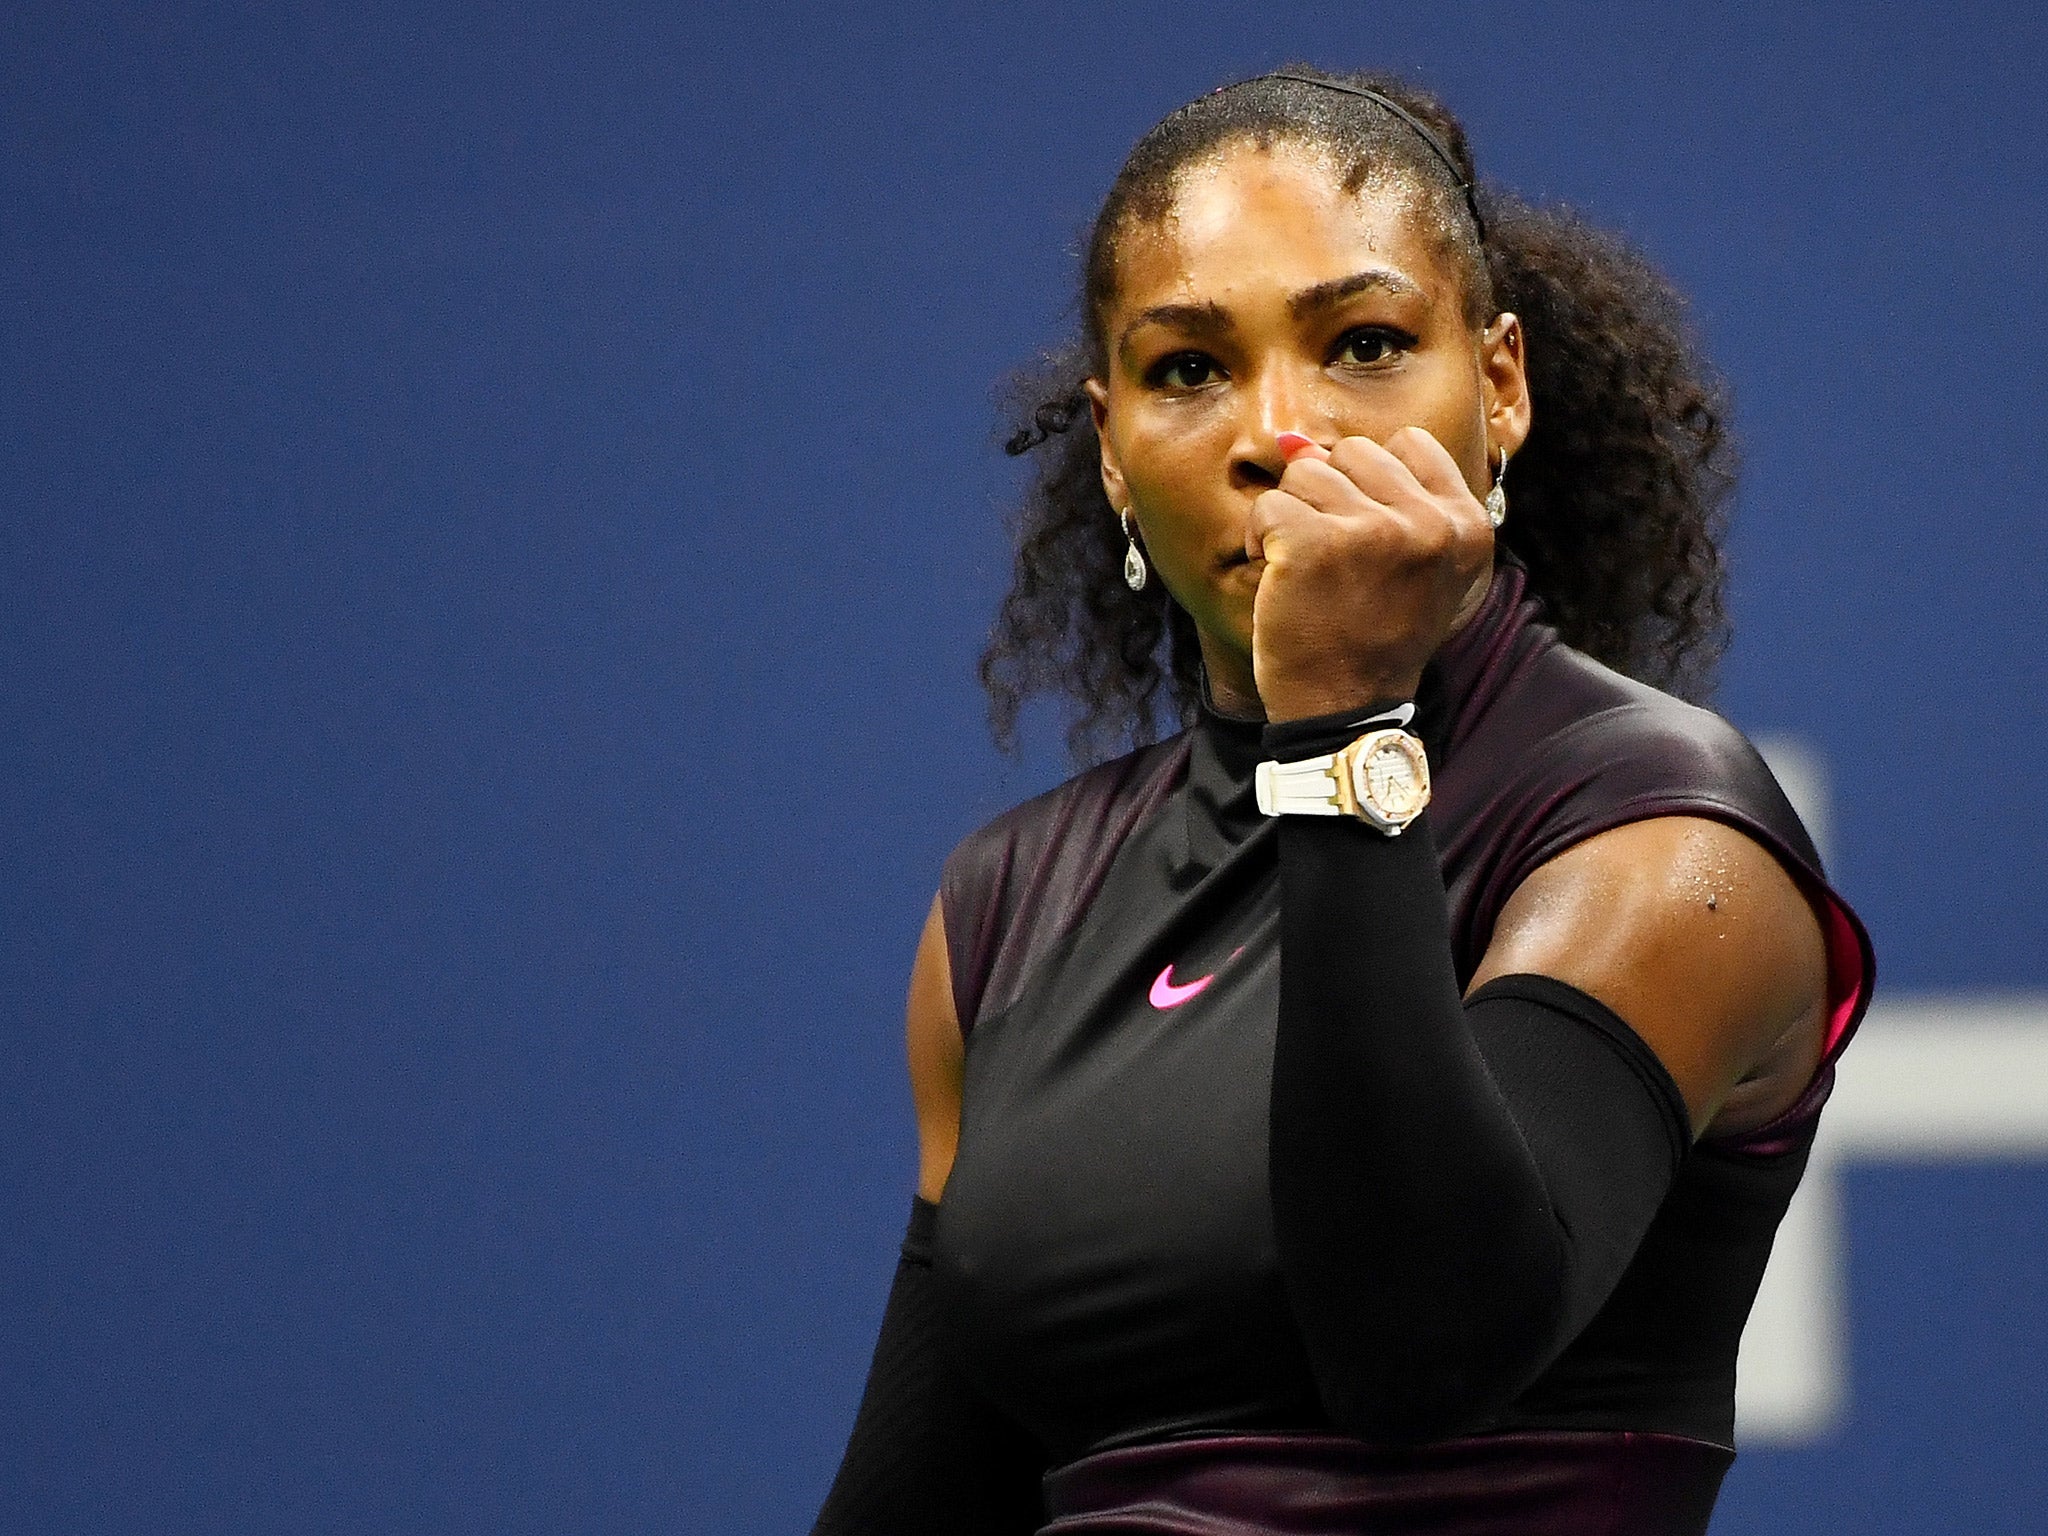 Serena Williams celebrates her quarter-final victory at the US Open